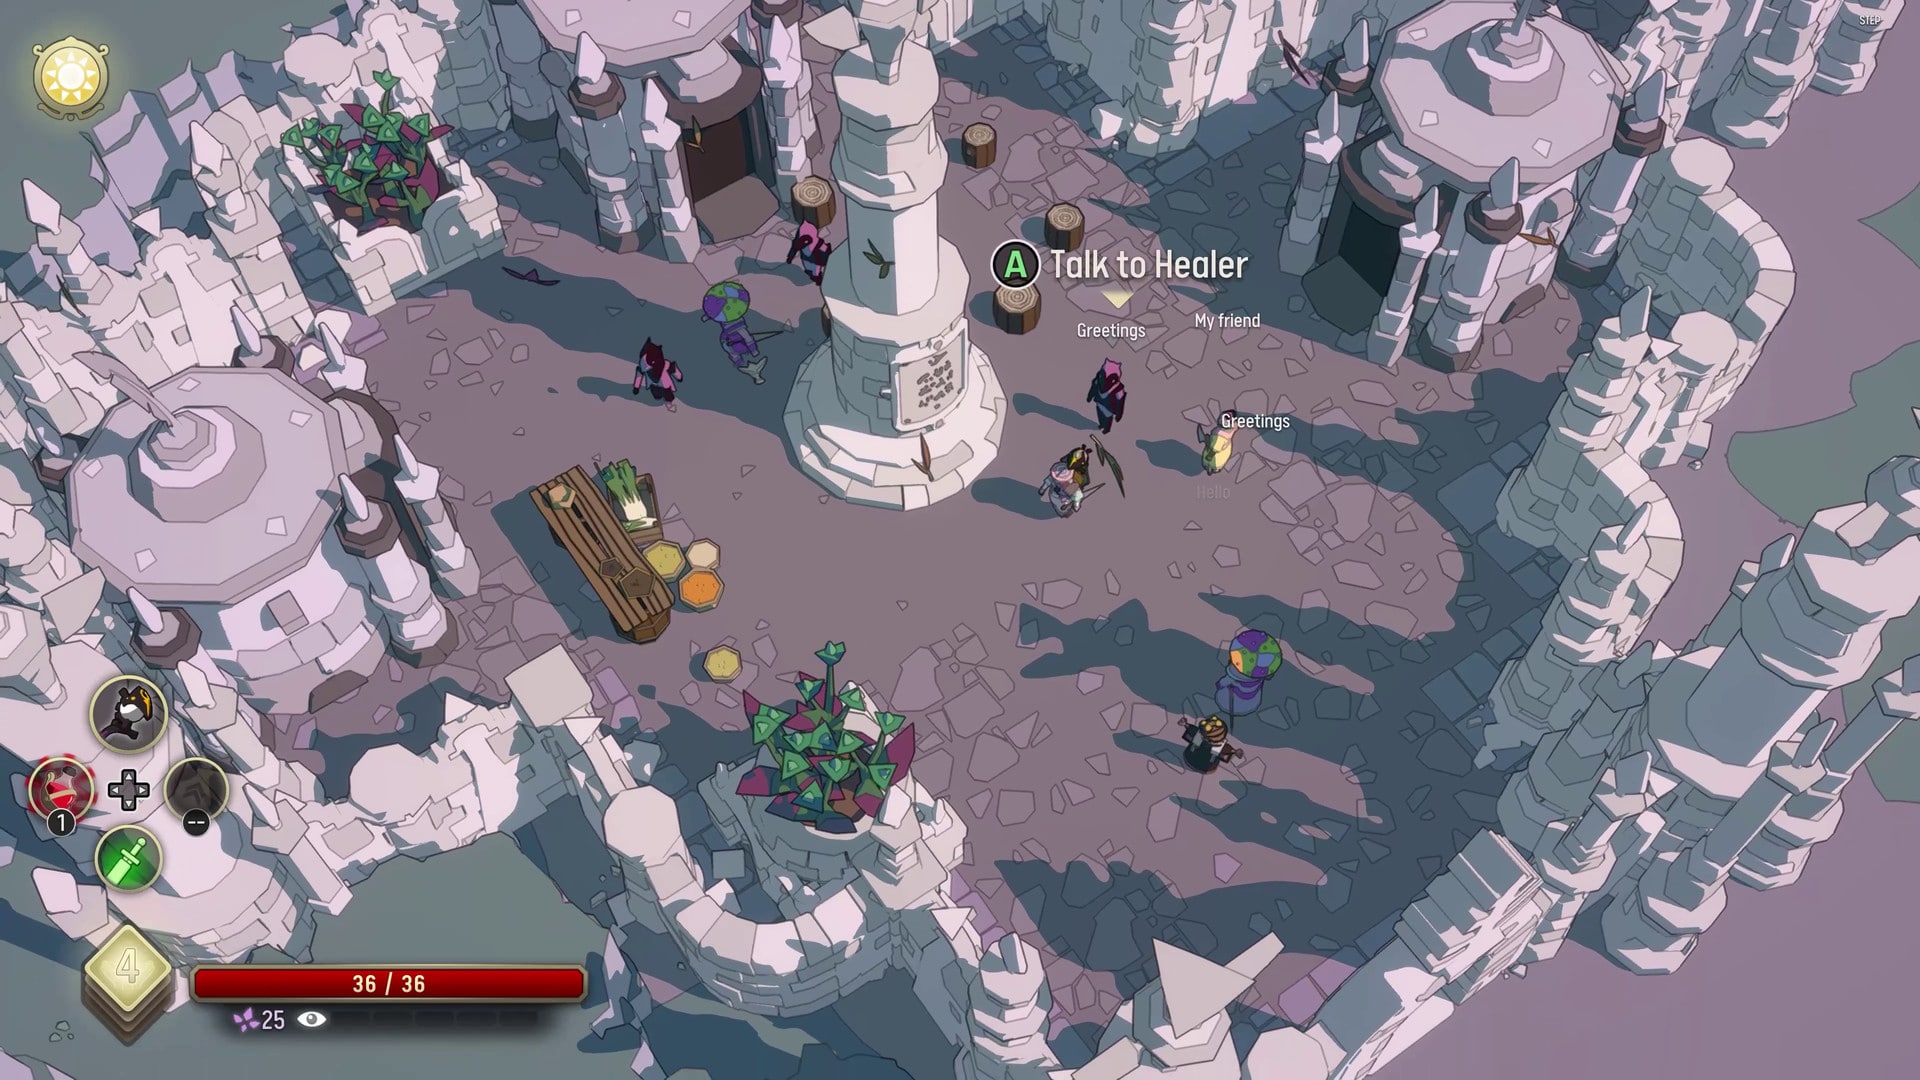 Gameplay image of Unexplored 2: The Wayfarer’s Legacy, showcasing its adventure-themed graphics and design